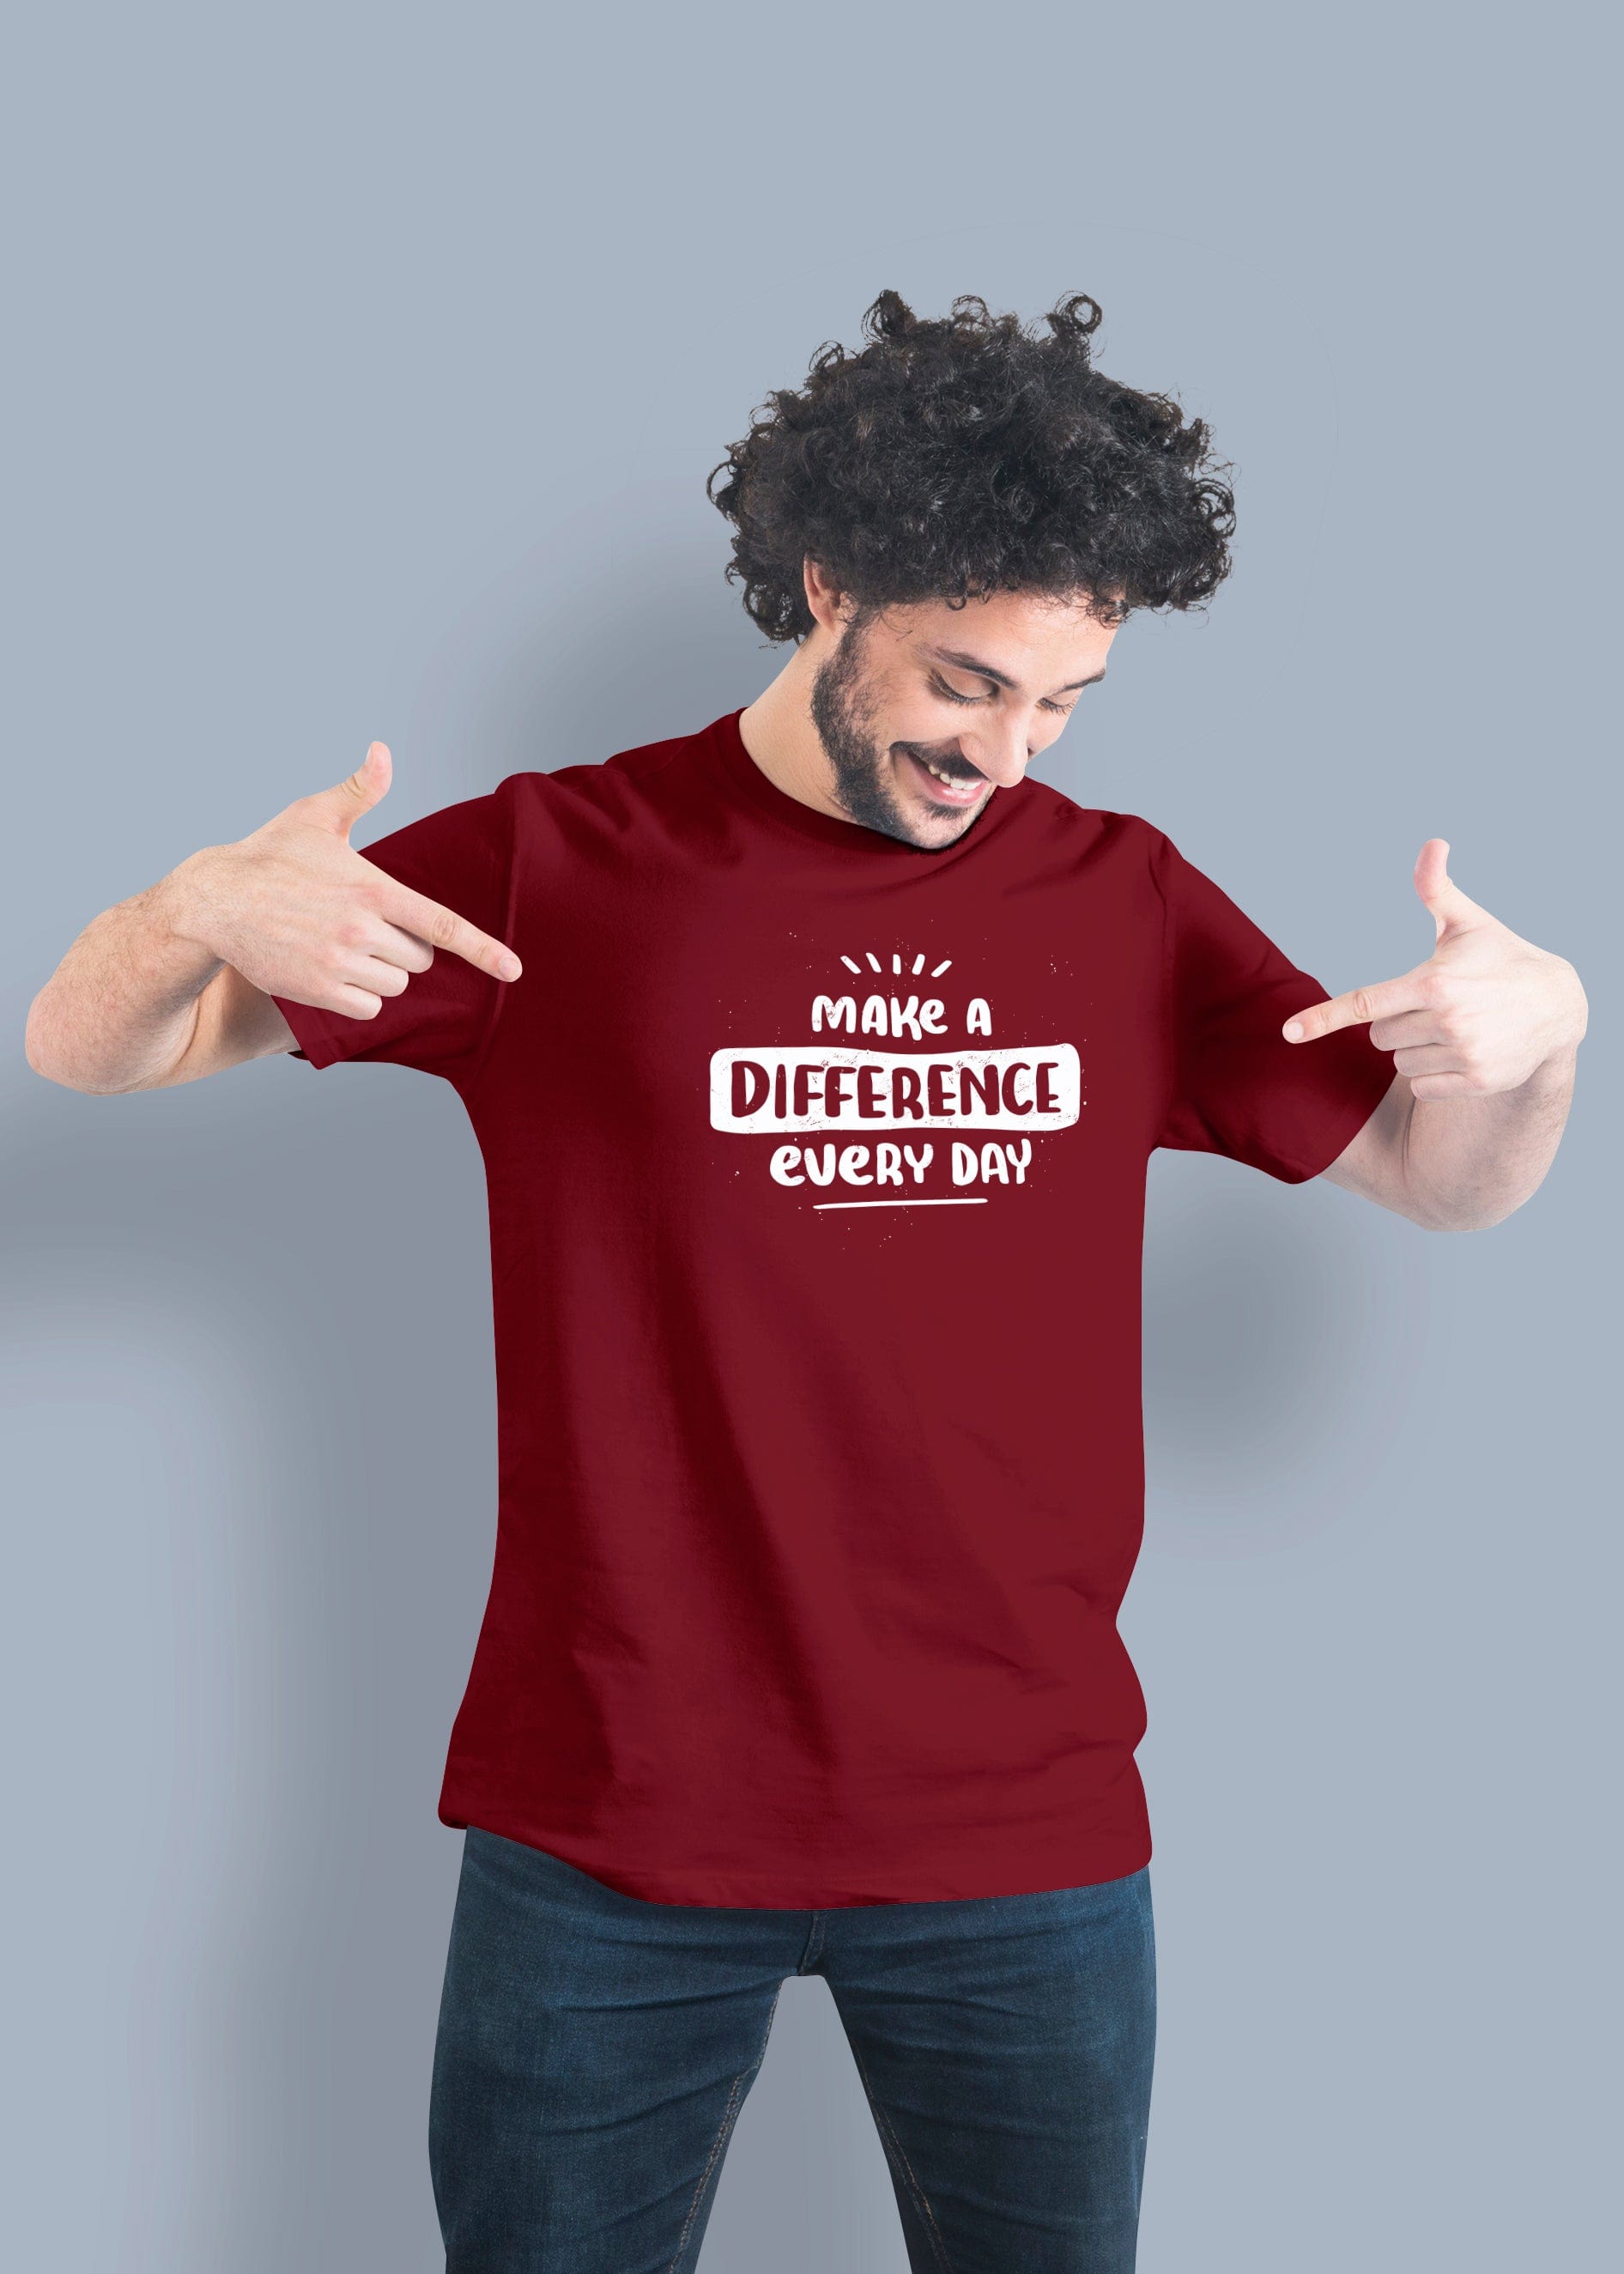 Make A Difference Printed Half Sleeve Premium Cotton T-shirt For Men